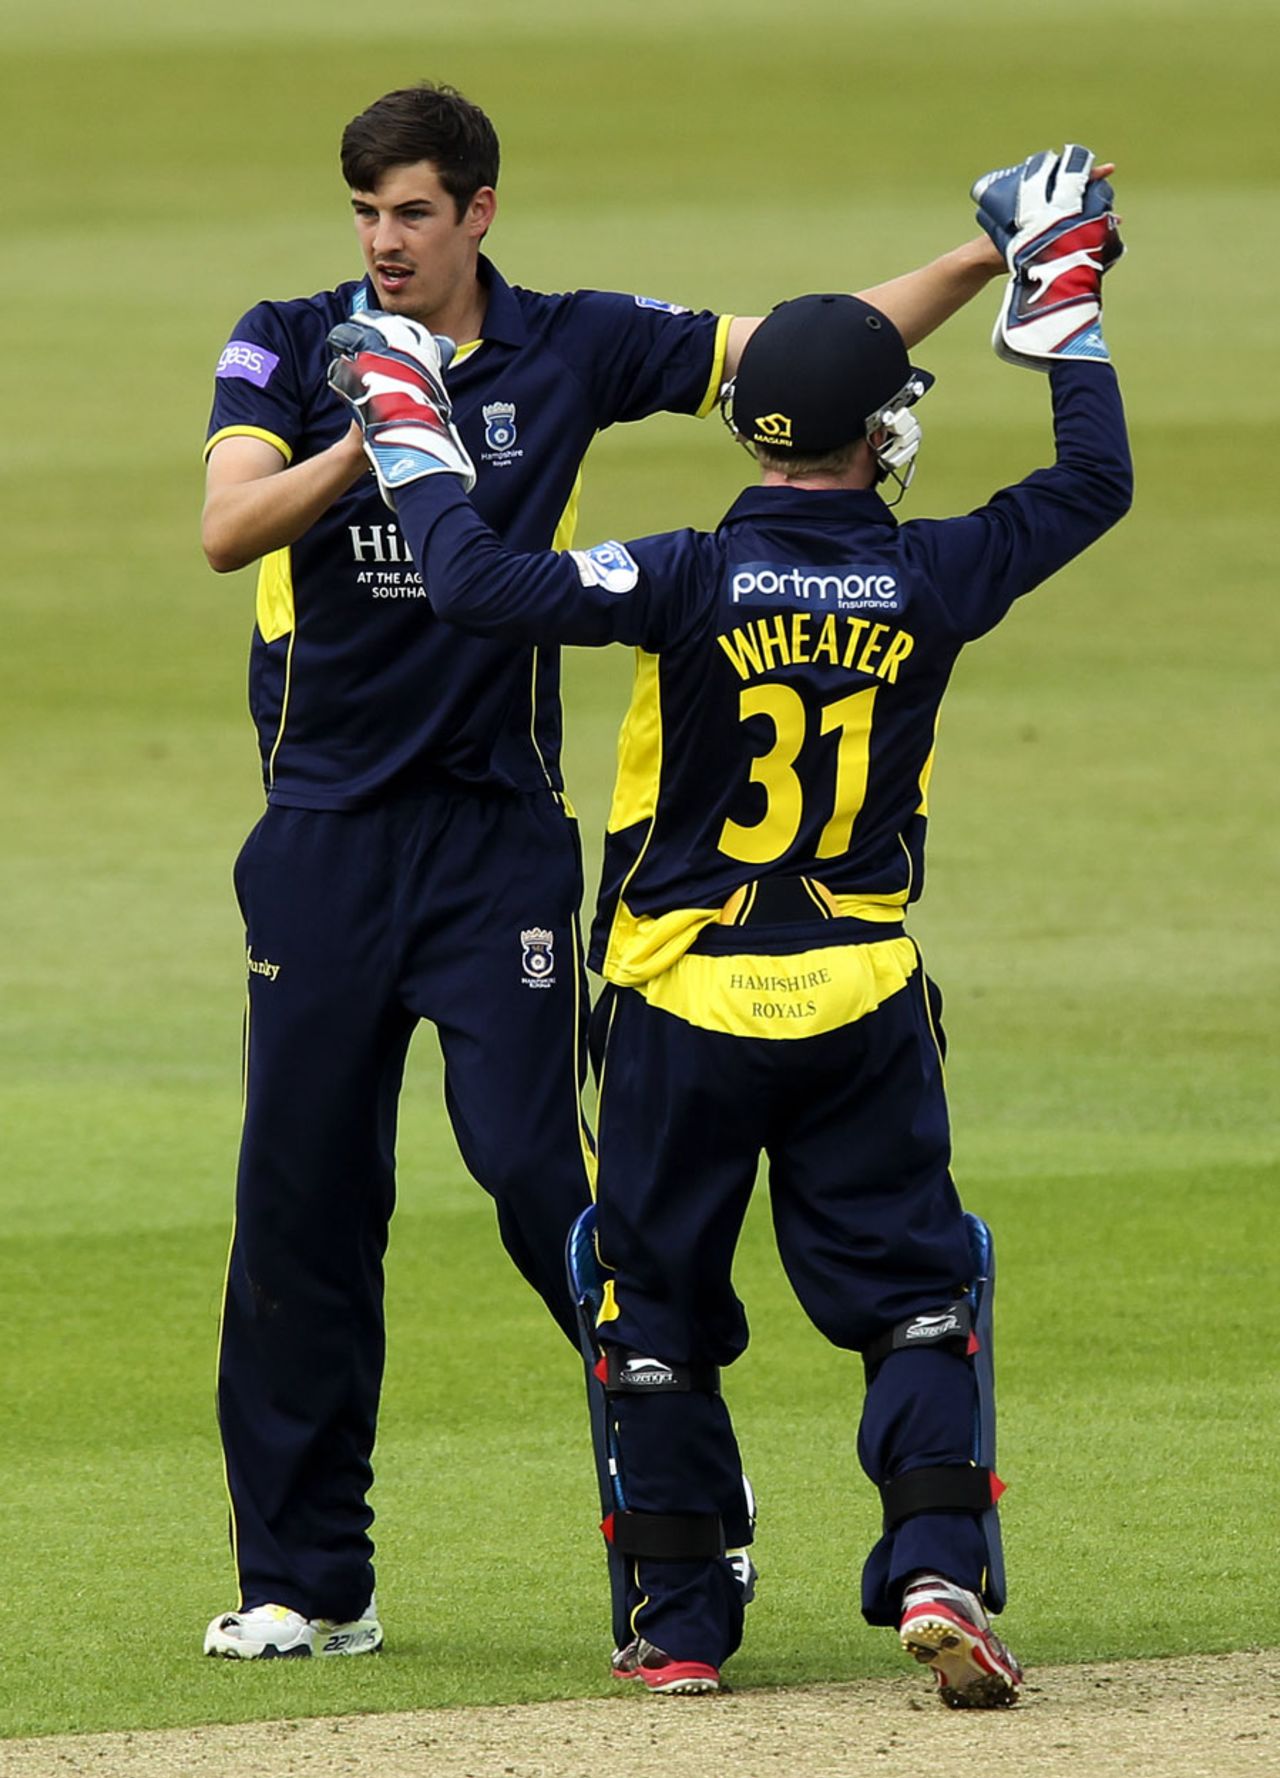 Chris Wood and Adam Wheater combined to stump Ben Stokes, Hampshire v Durham, Yorkshire Bank 40, Ageas Bowl, May 19, 2013